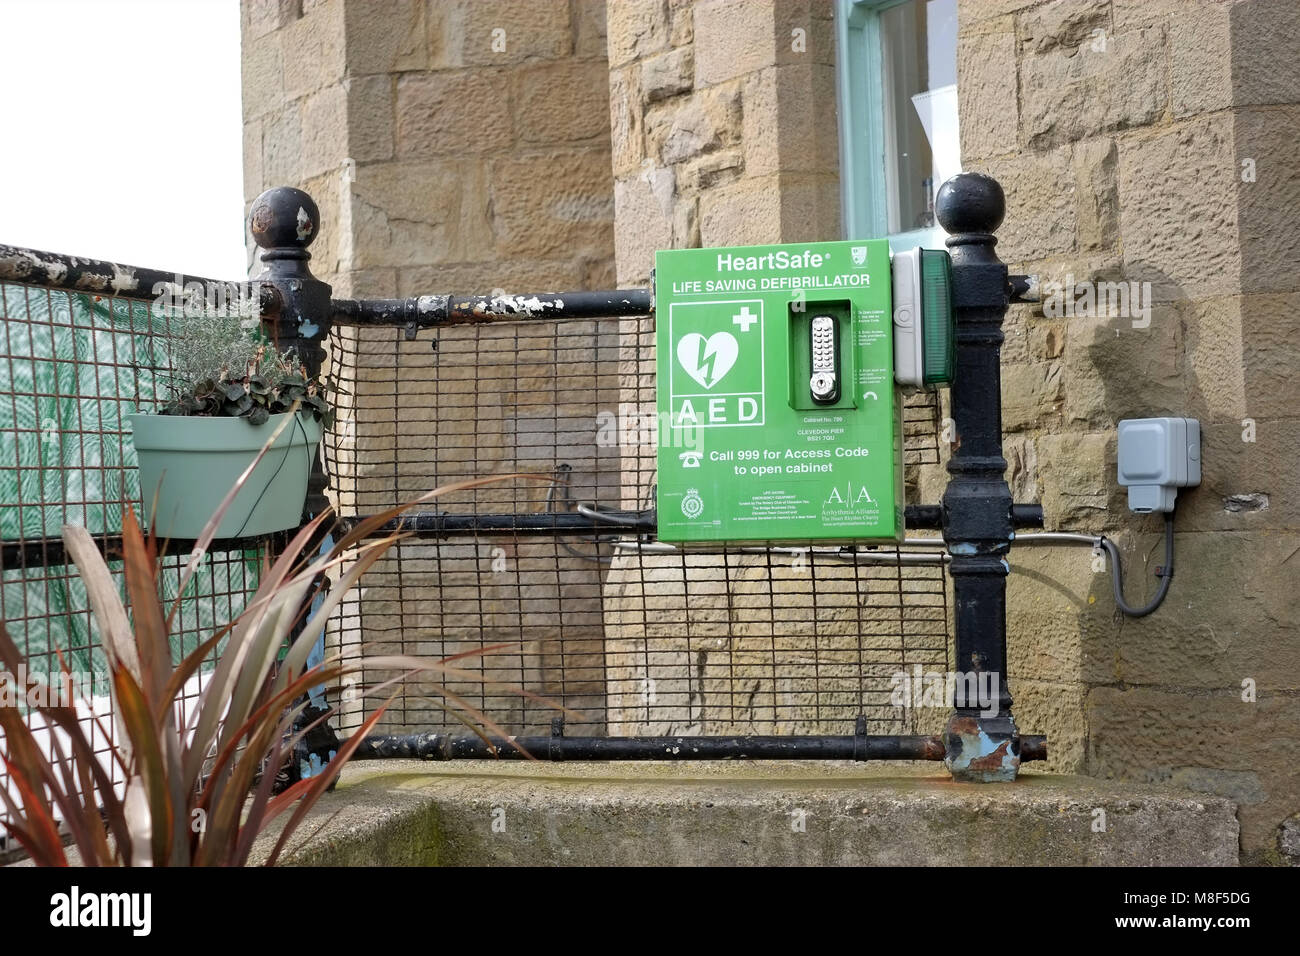 March 2015 - A publicly place emergency defibrillator near the pier in Clevedon, North Somerset. Stock Photo